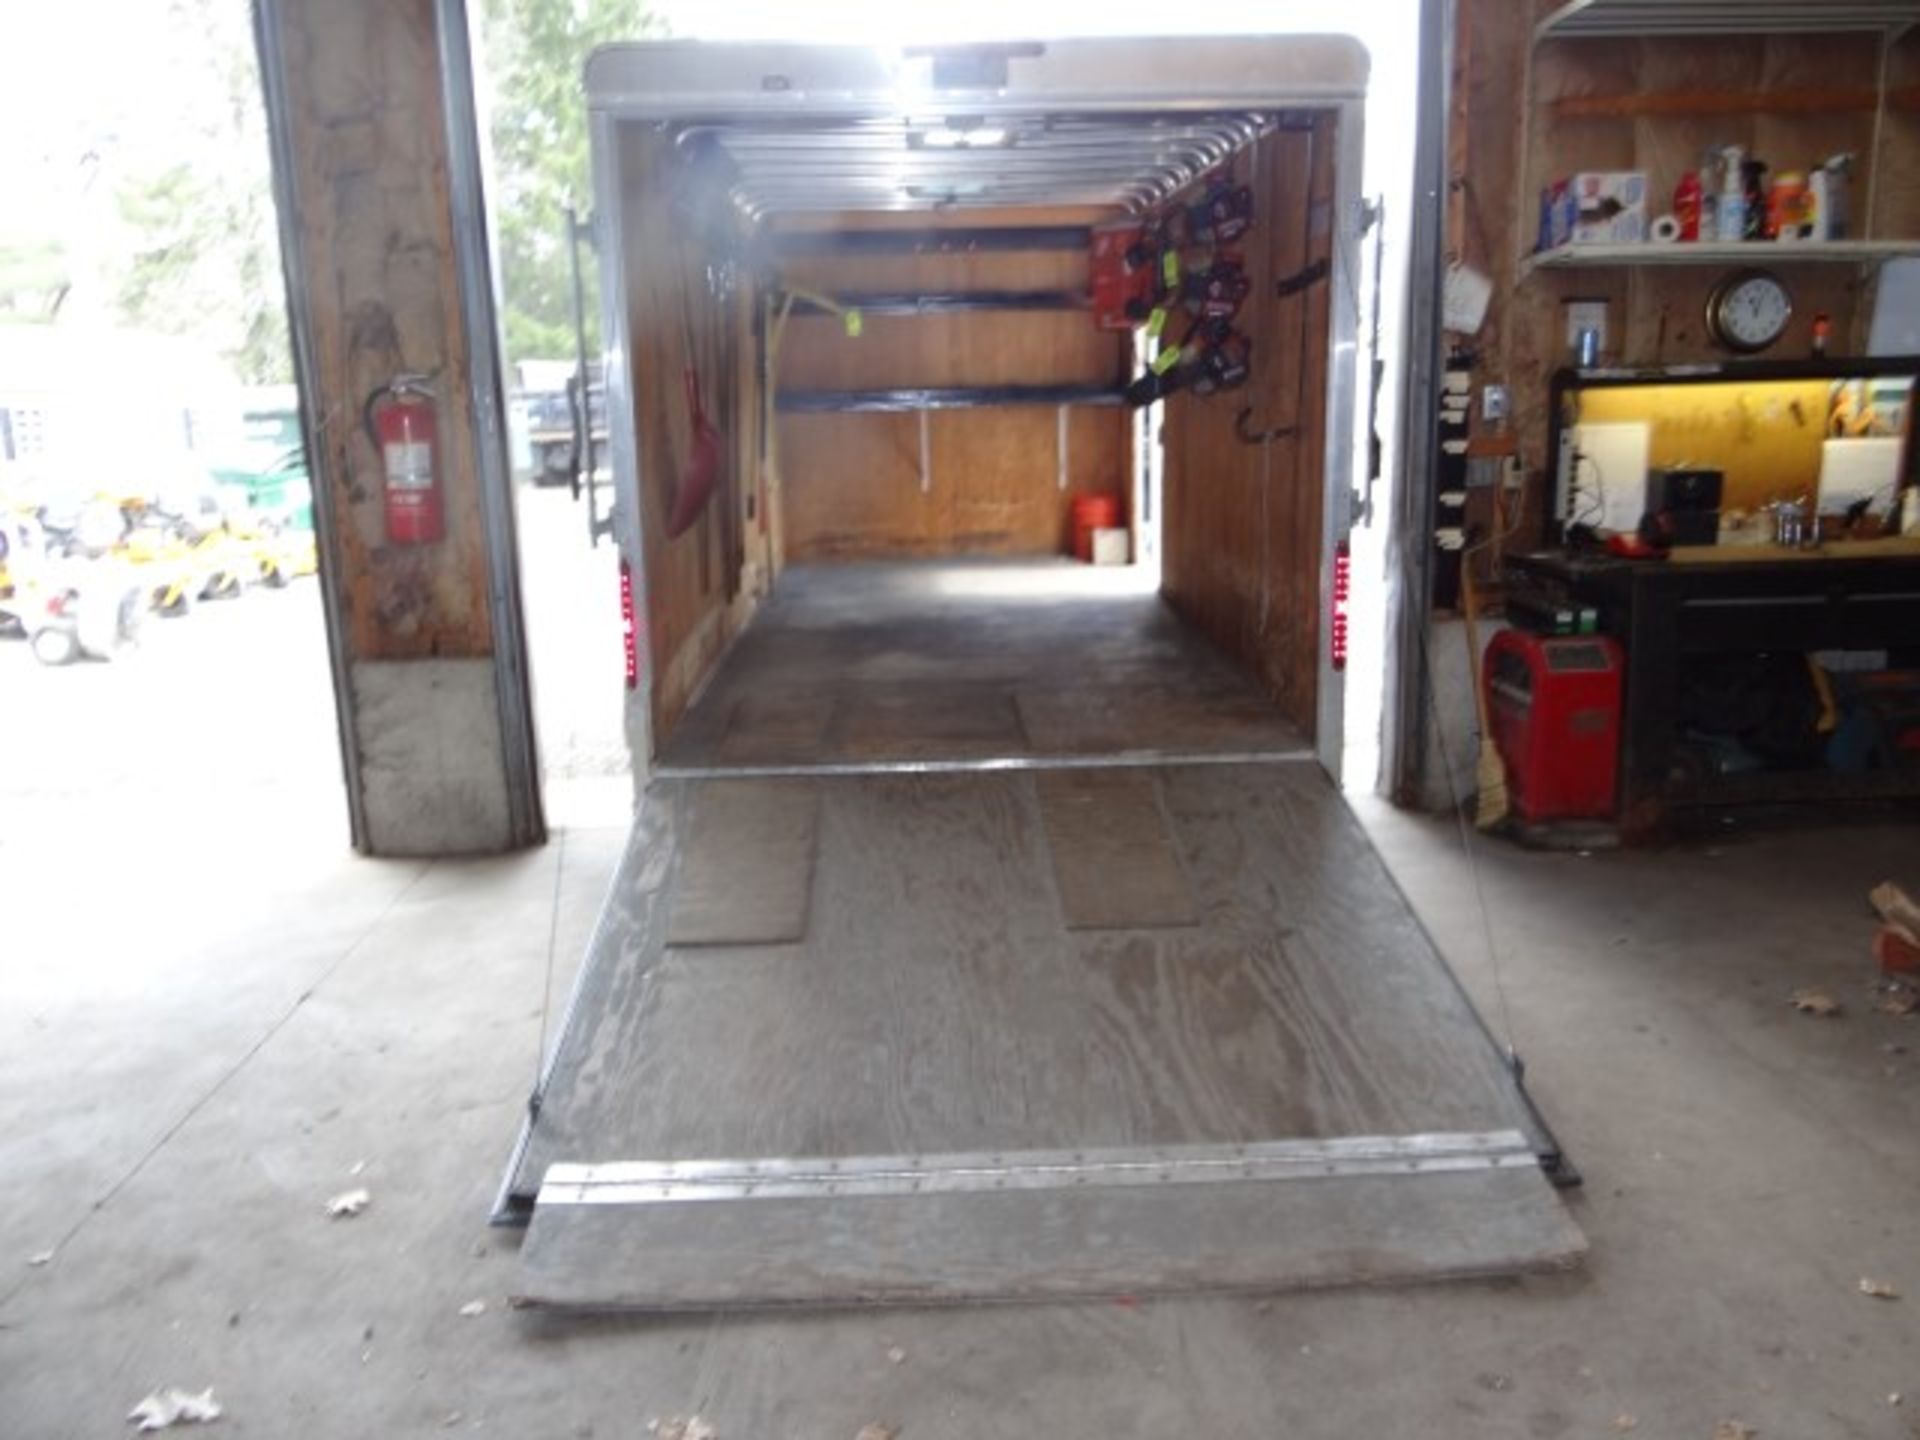 2013 Car-Mate 16' Tandem Axle Enclosed Trailer With Drop Down Rear Door, VIN 5A3C716D2D6002644, With - Image 3 of 3